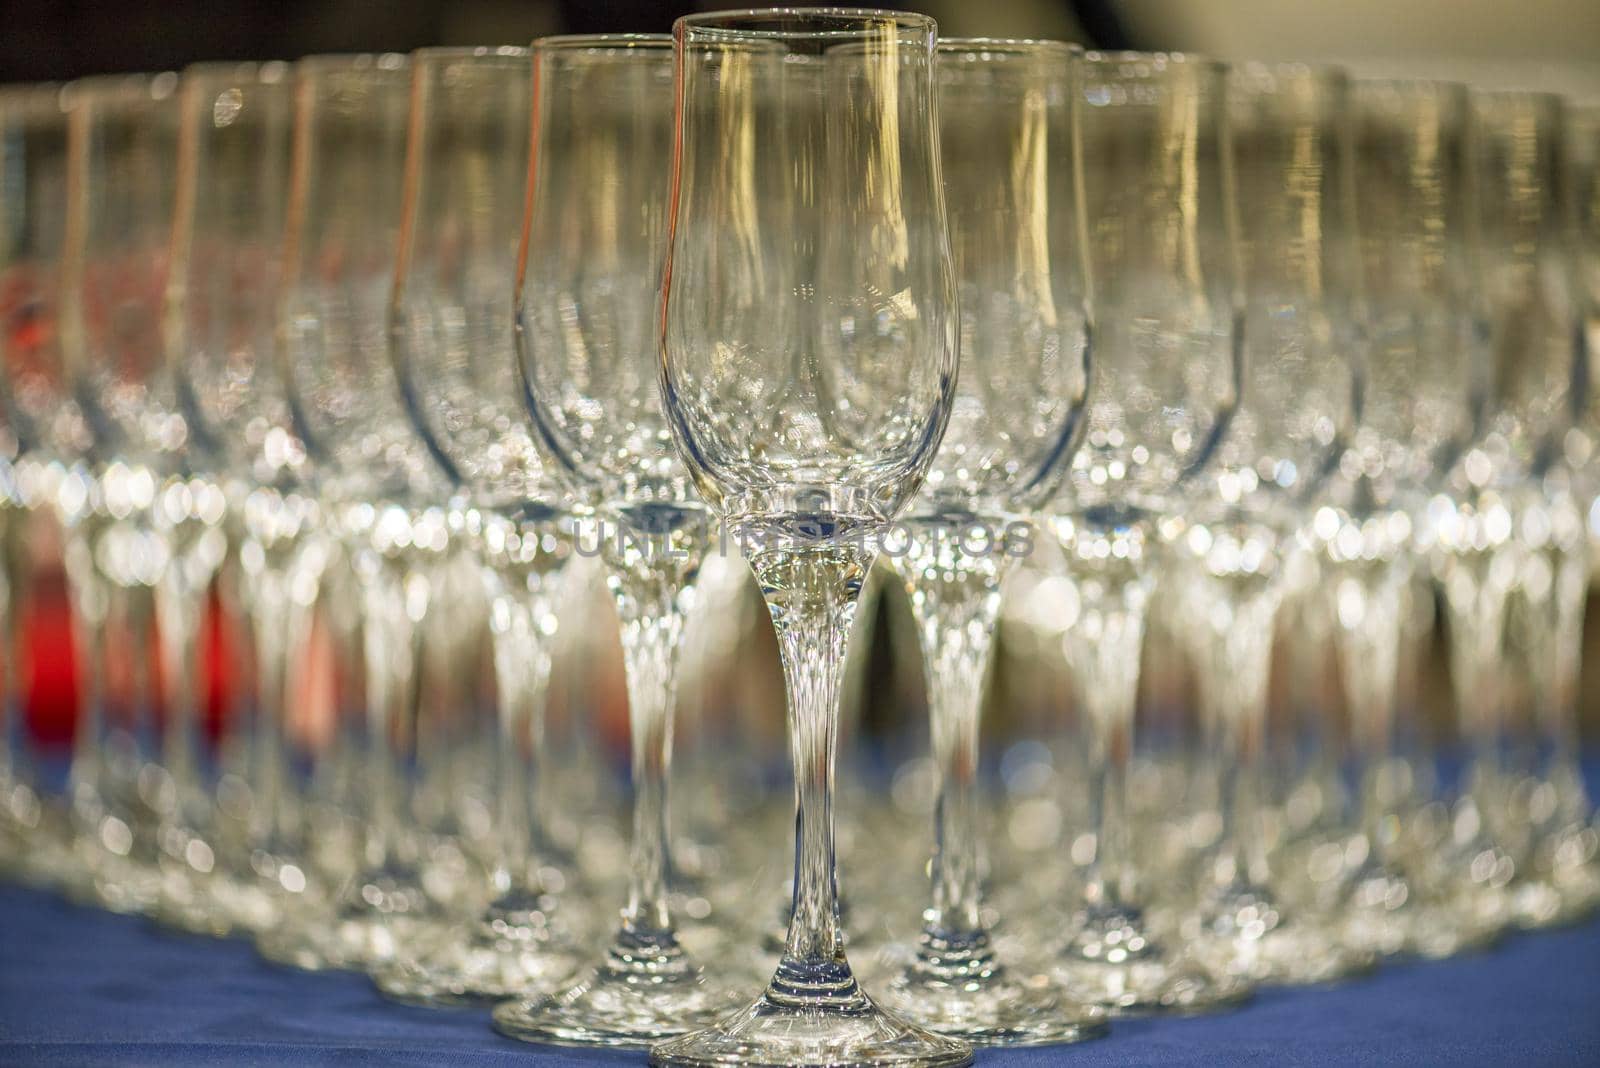 Crystal glasses on the bar.